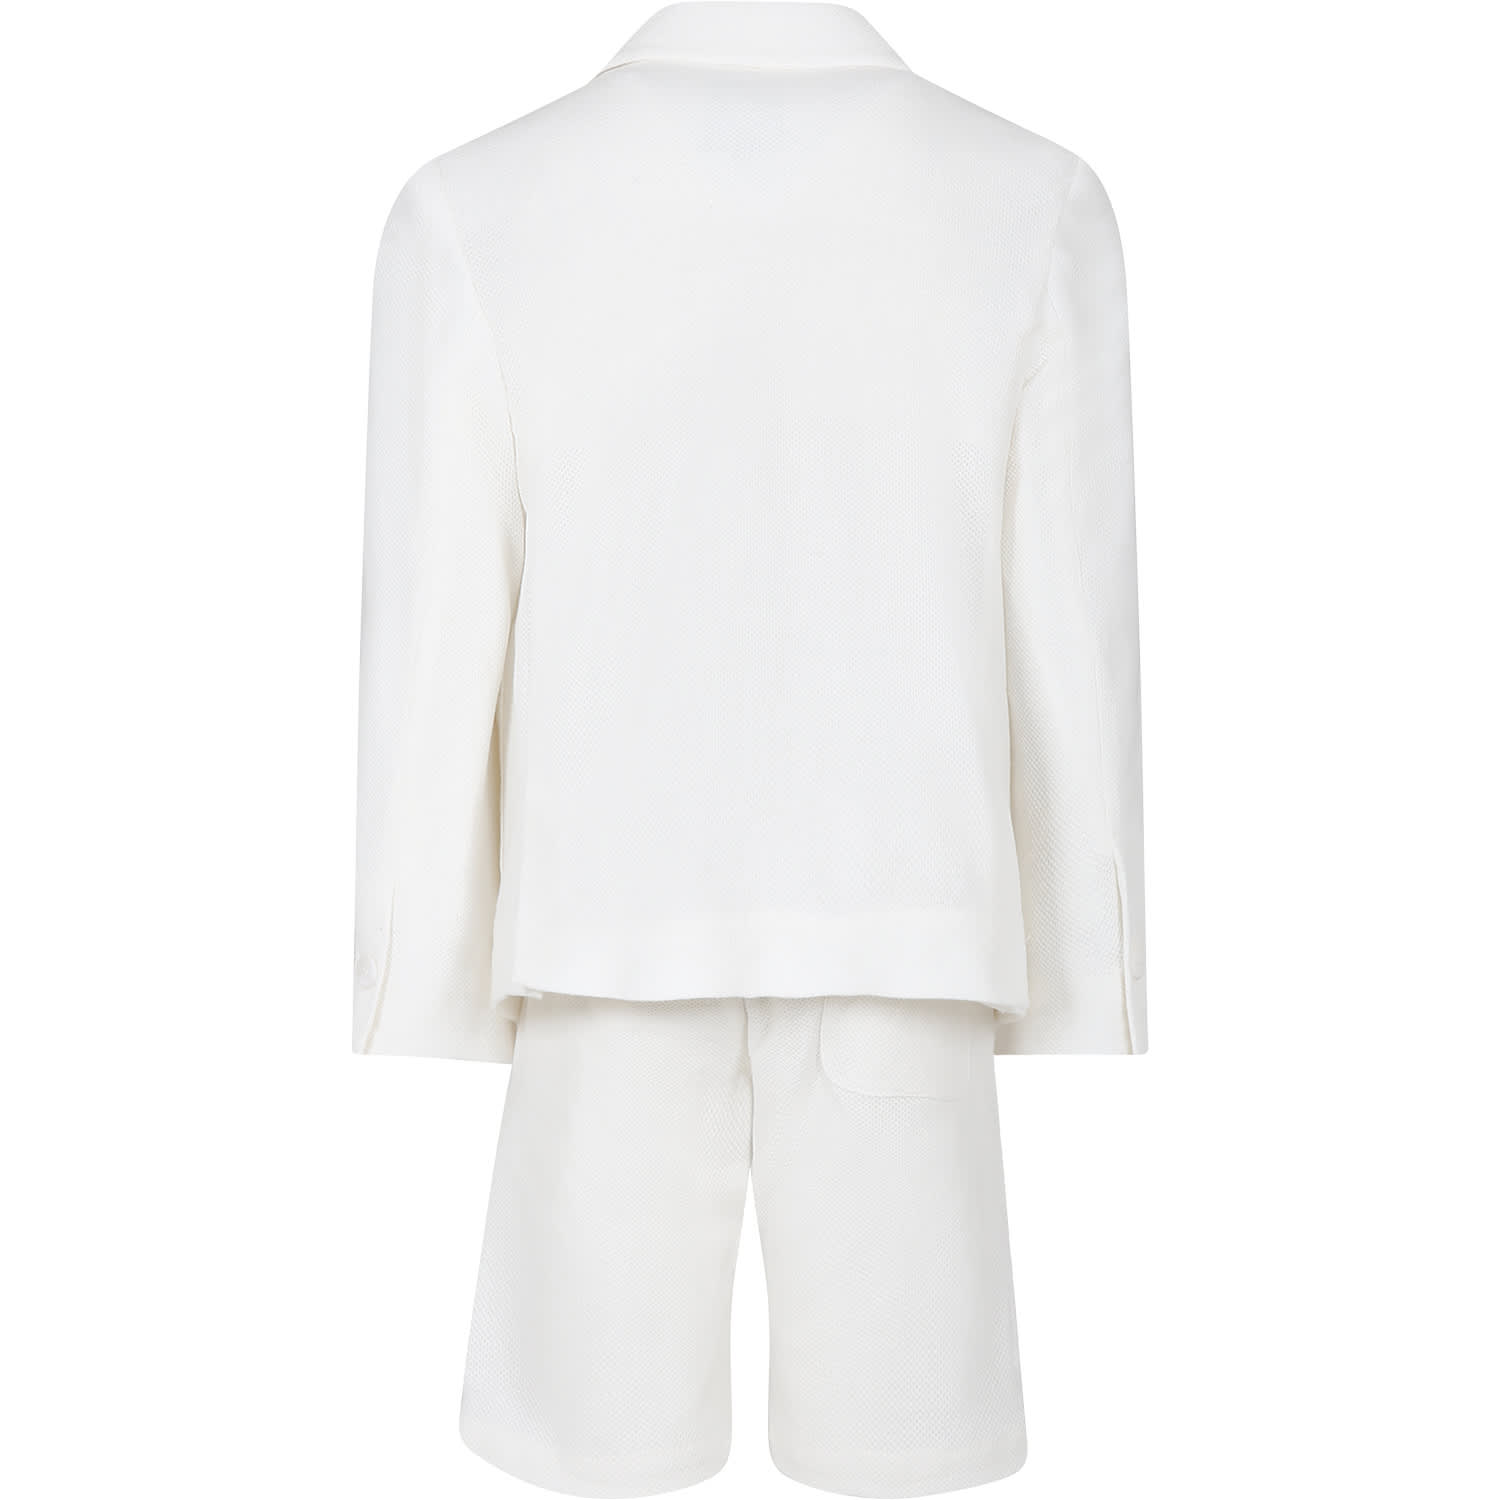 Shop Fay Ivory Suit For Boy With Logo